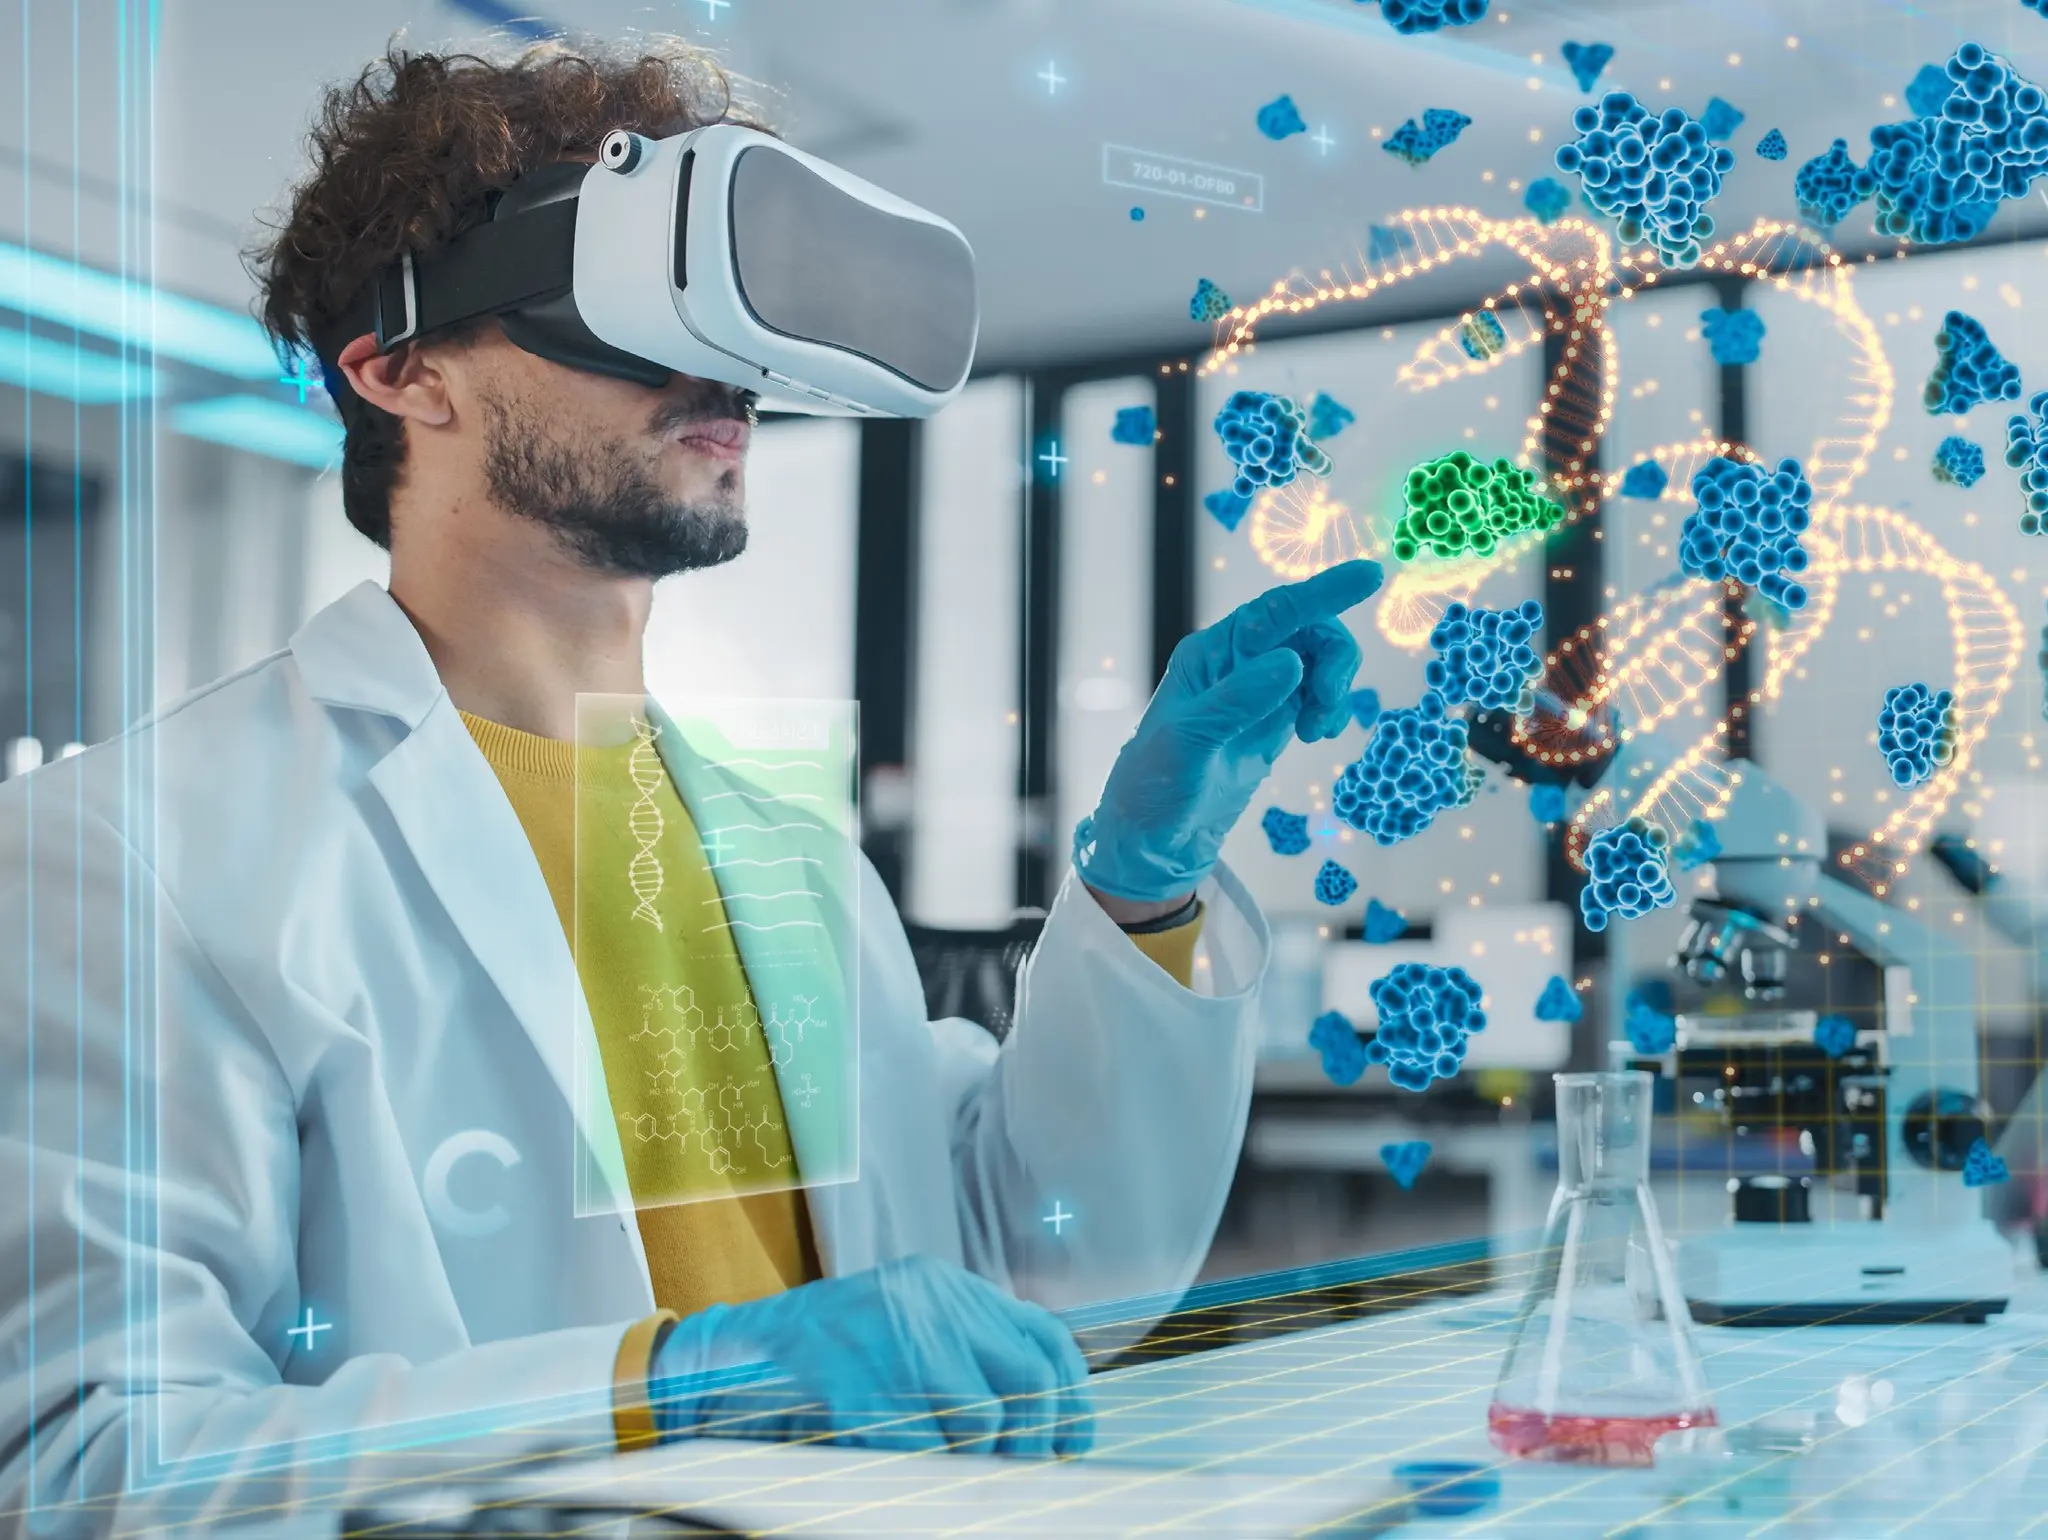 How AR/VR, AI and 3D technology are powering the next industrial revolution for healthcare